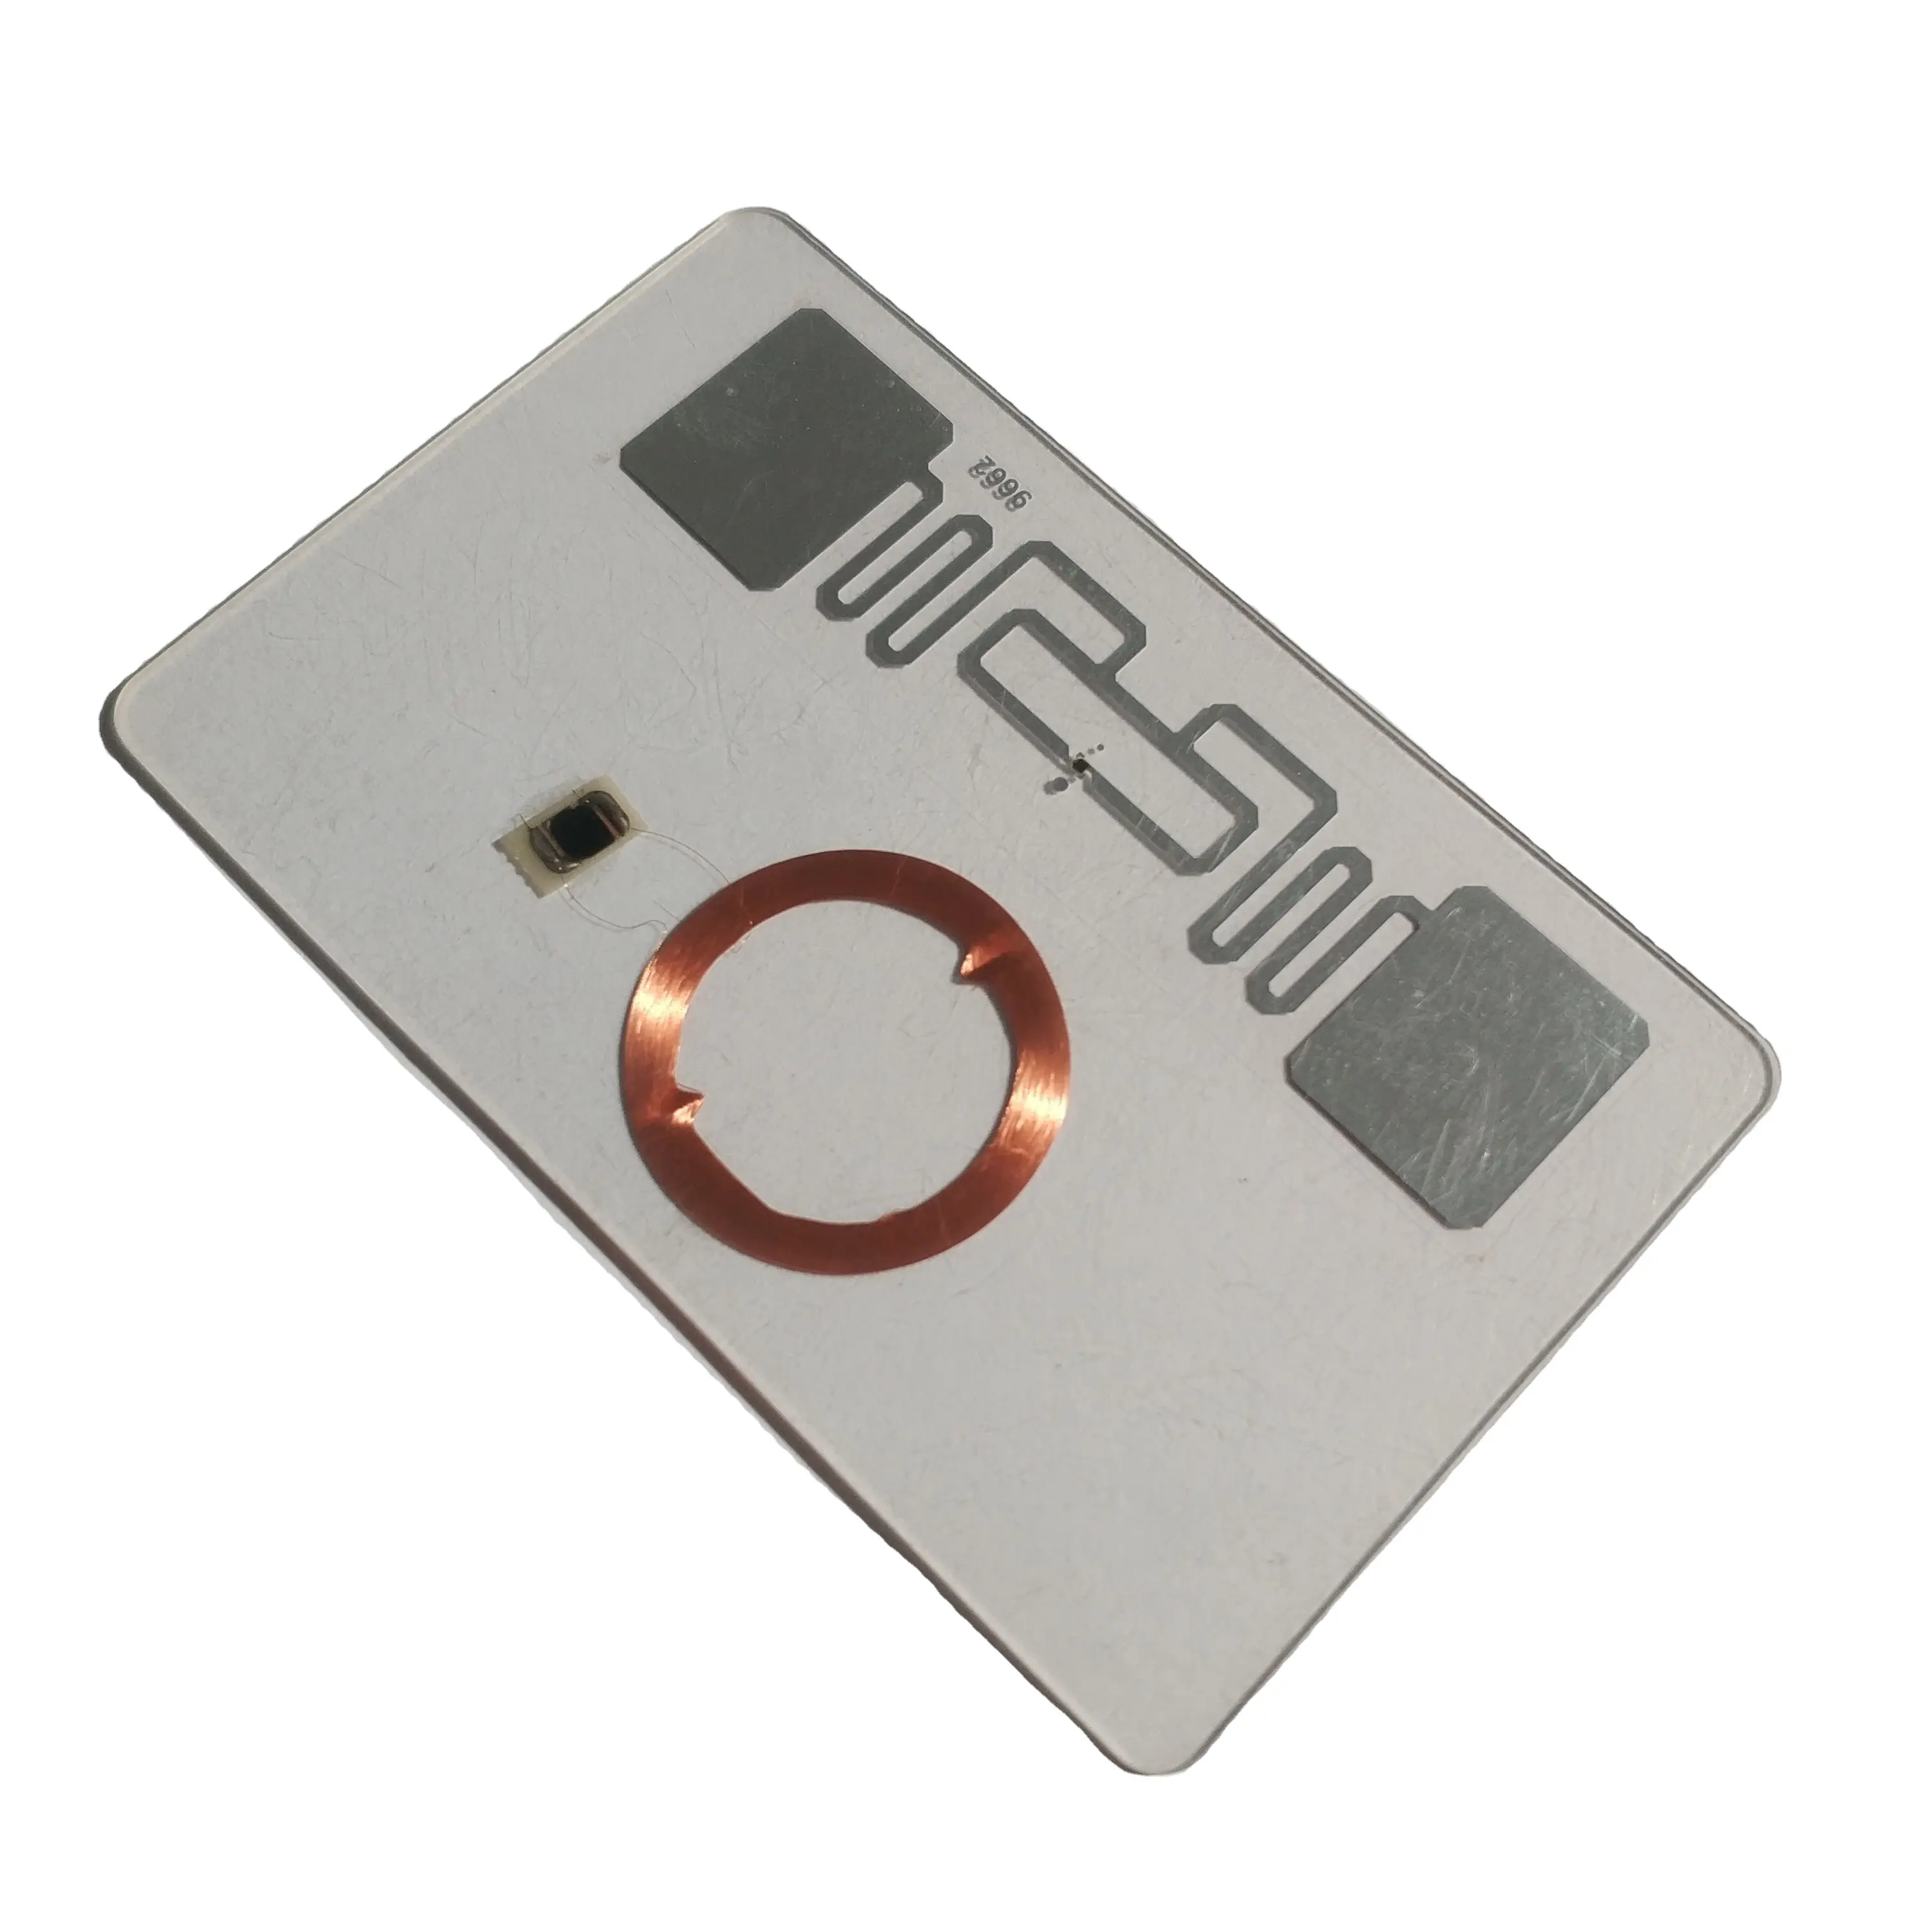 Access control credit card contactless hybrid dual frequency tk4100 rfid chip pvc smart EM 125Khz t5577 proximity rfid card